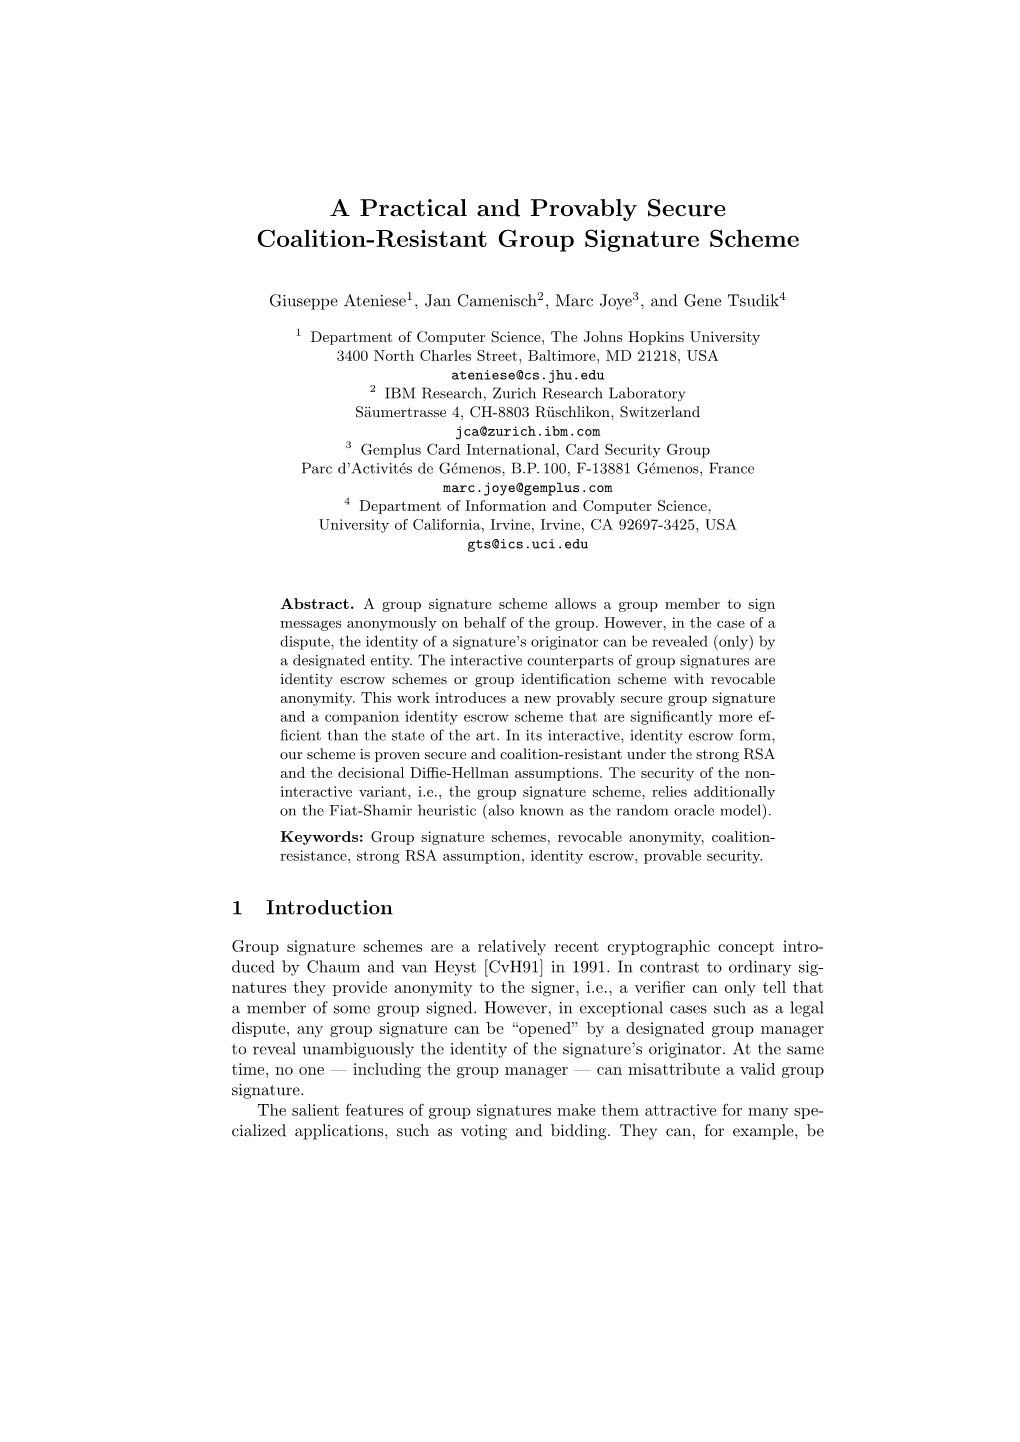 A Practical and Provably Secure Coalition-Resistant Group Signature Scheme